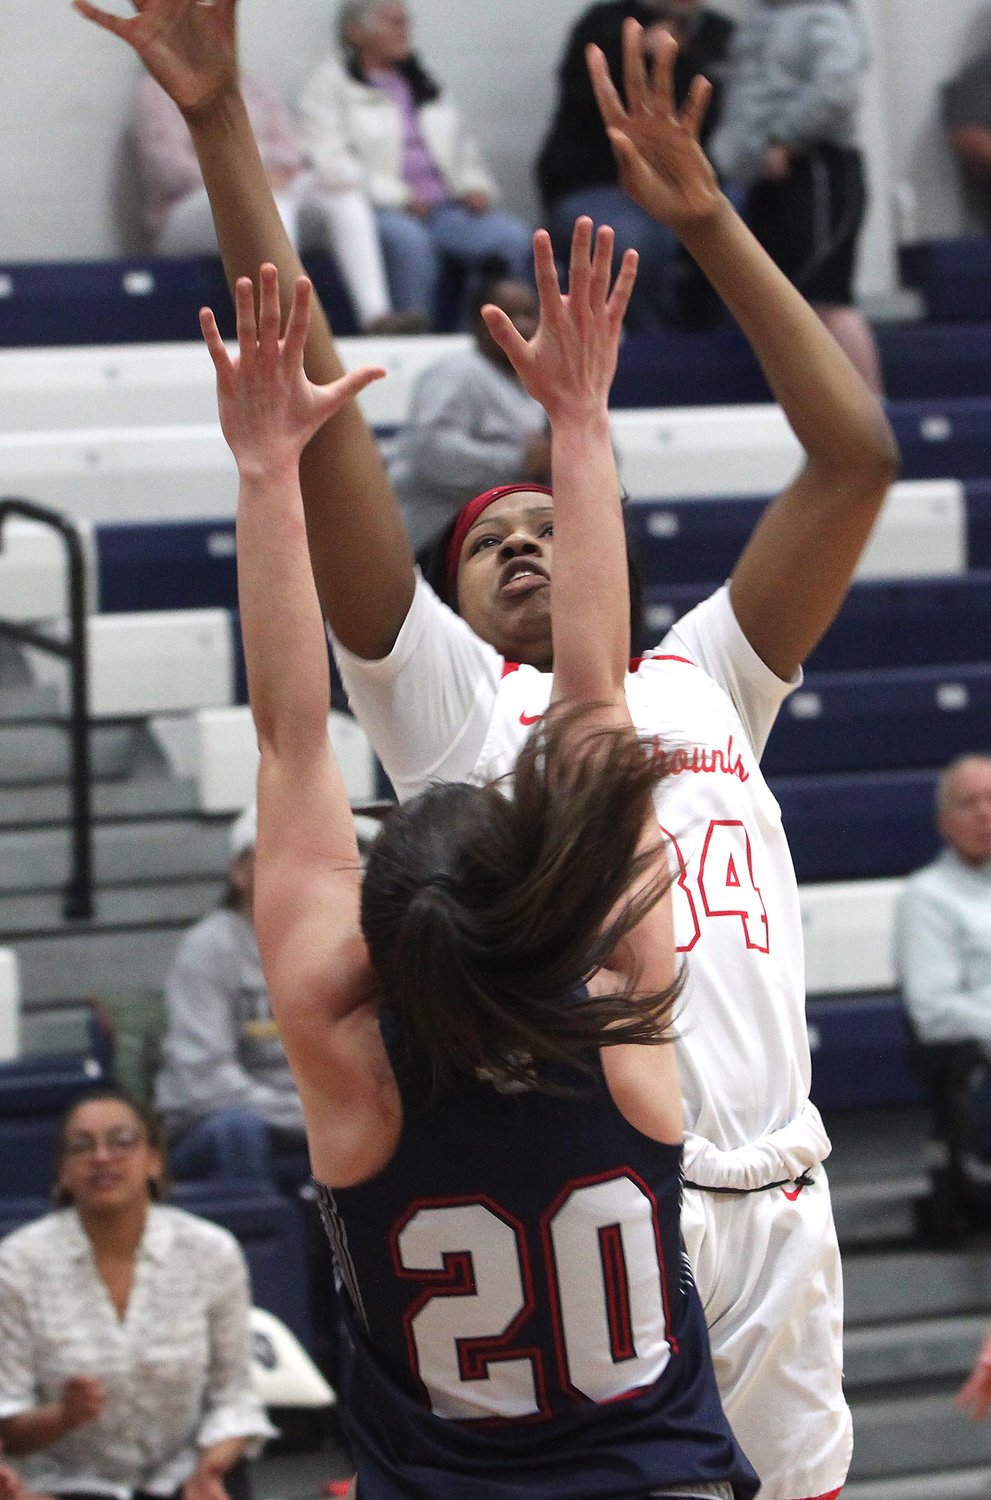 B'Aunce Carter of Belleville, Ill. (white jersey) returns to Moberly Area Community College for her sophomore basketball campaign this 2021 season. The 5'11 forward/post averaged 7.9 points and 4.6 rebounds a year ago in helping the Lady Greyhounds acquire a 29-4 record and qualify for the NJCAA Division I Women's National Tournament that was canceled due to the coronavirus.  MACC women are scheduled to tip off its new season 3 p.m. Saturday in St. Louis against the jayvee squad from Missouri Baptist University.